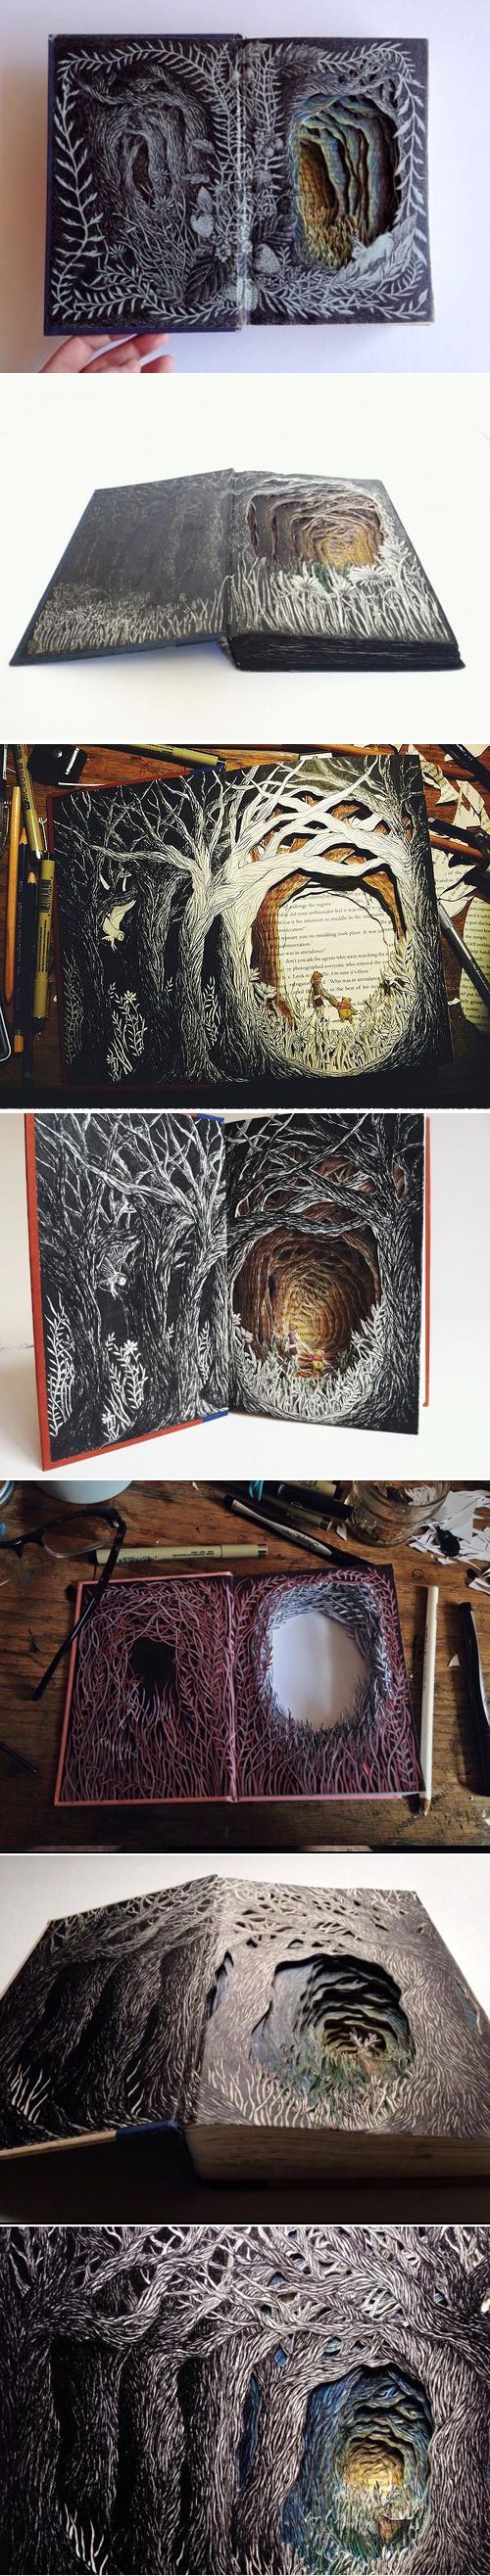 My Owl Barn: 3D Illustrations from Discarded Books by Isobelle Ouzman